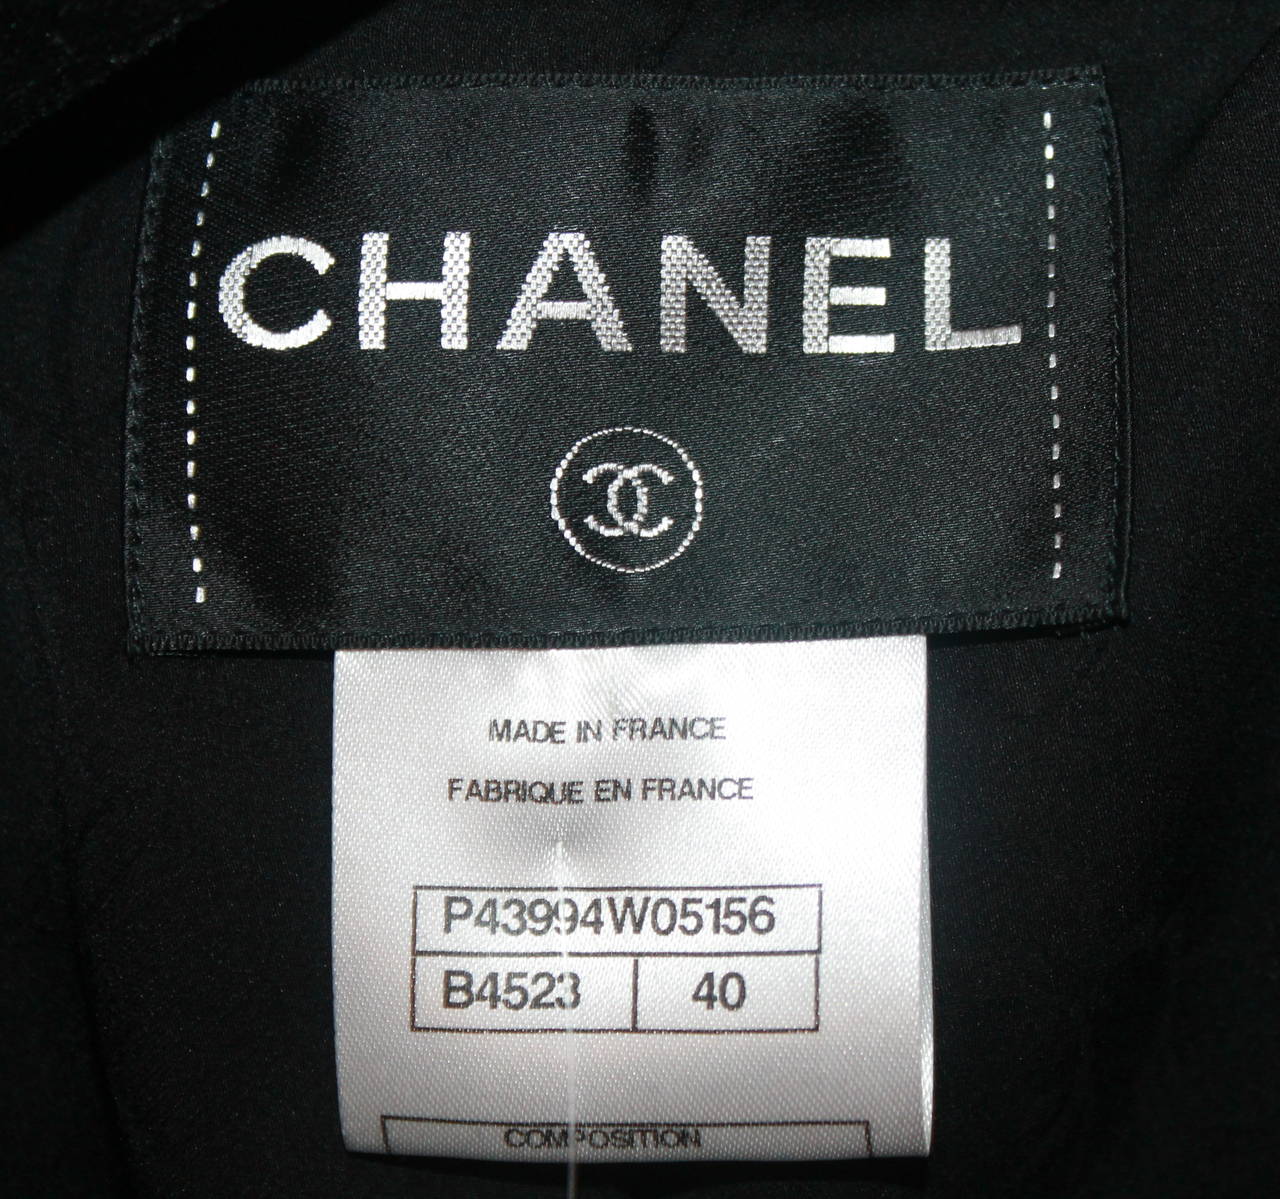 Chanel Black tuxedo style jacket w/ pink removable cuffs-40 2